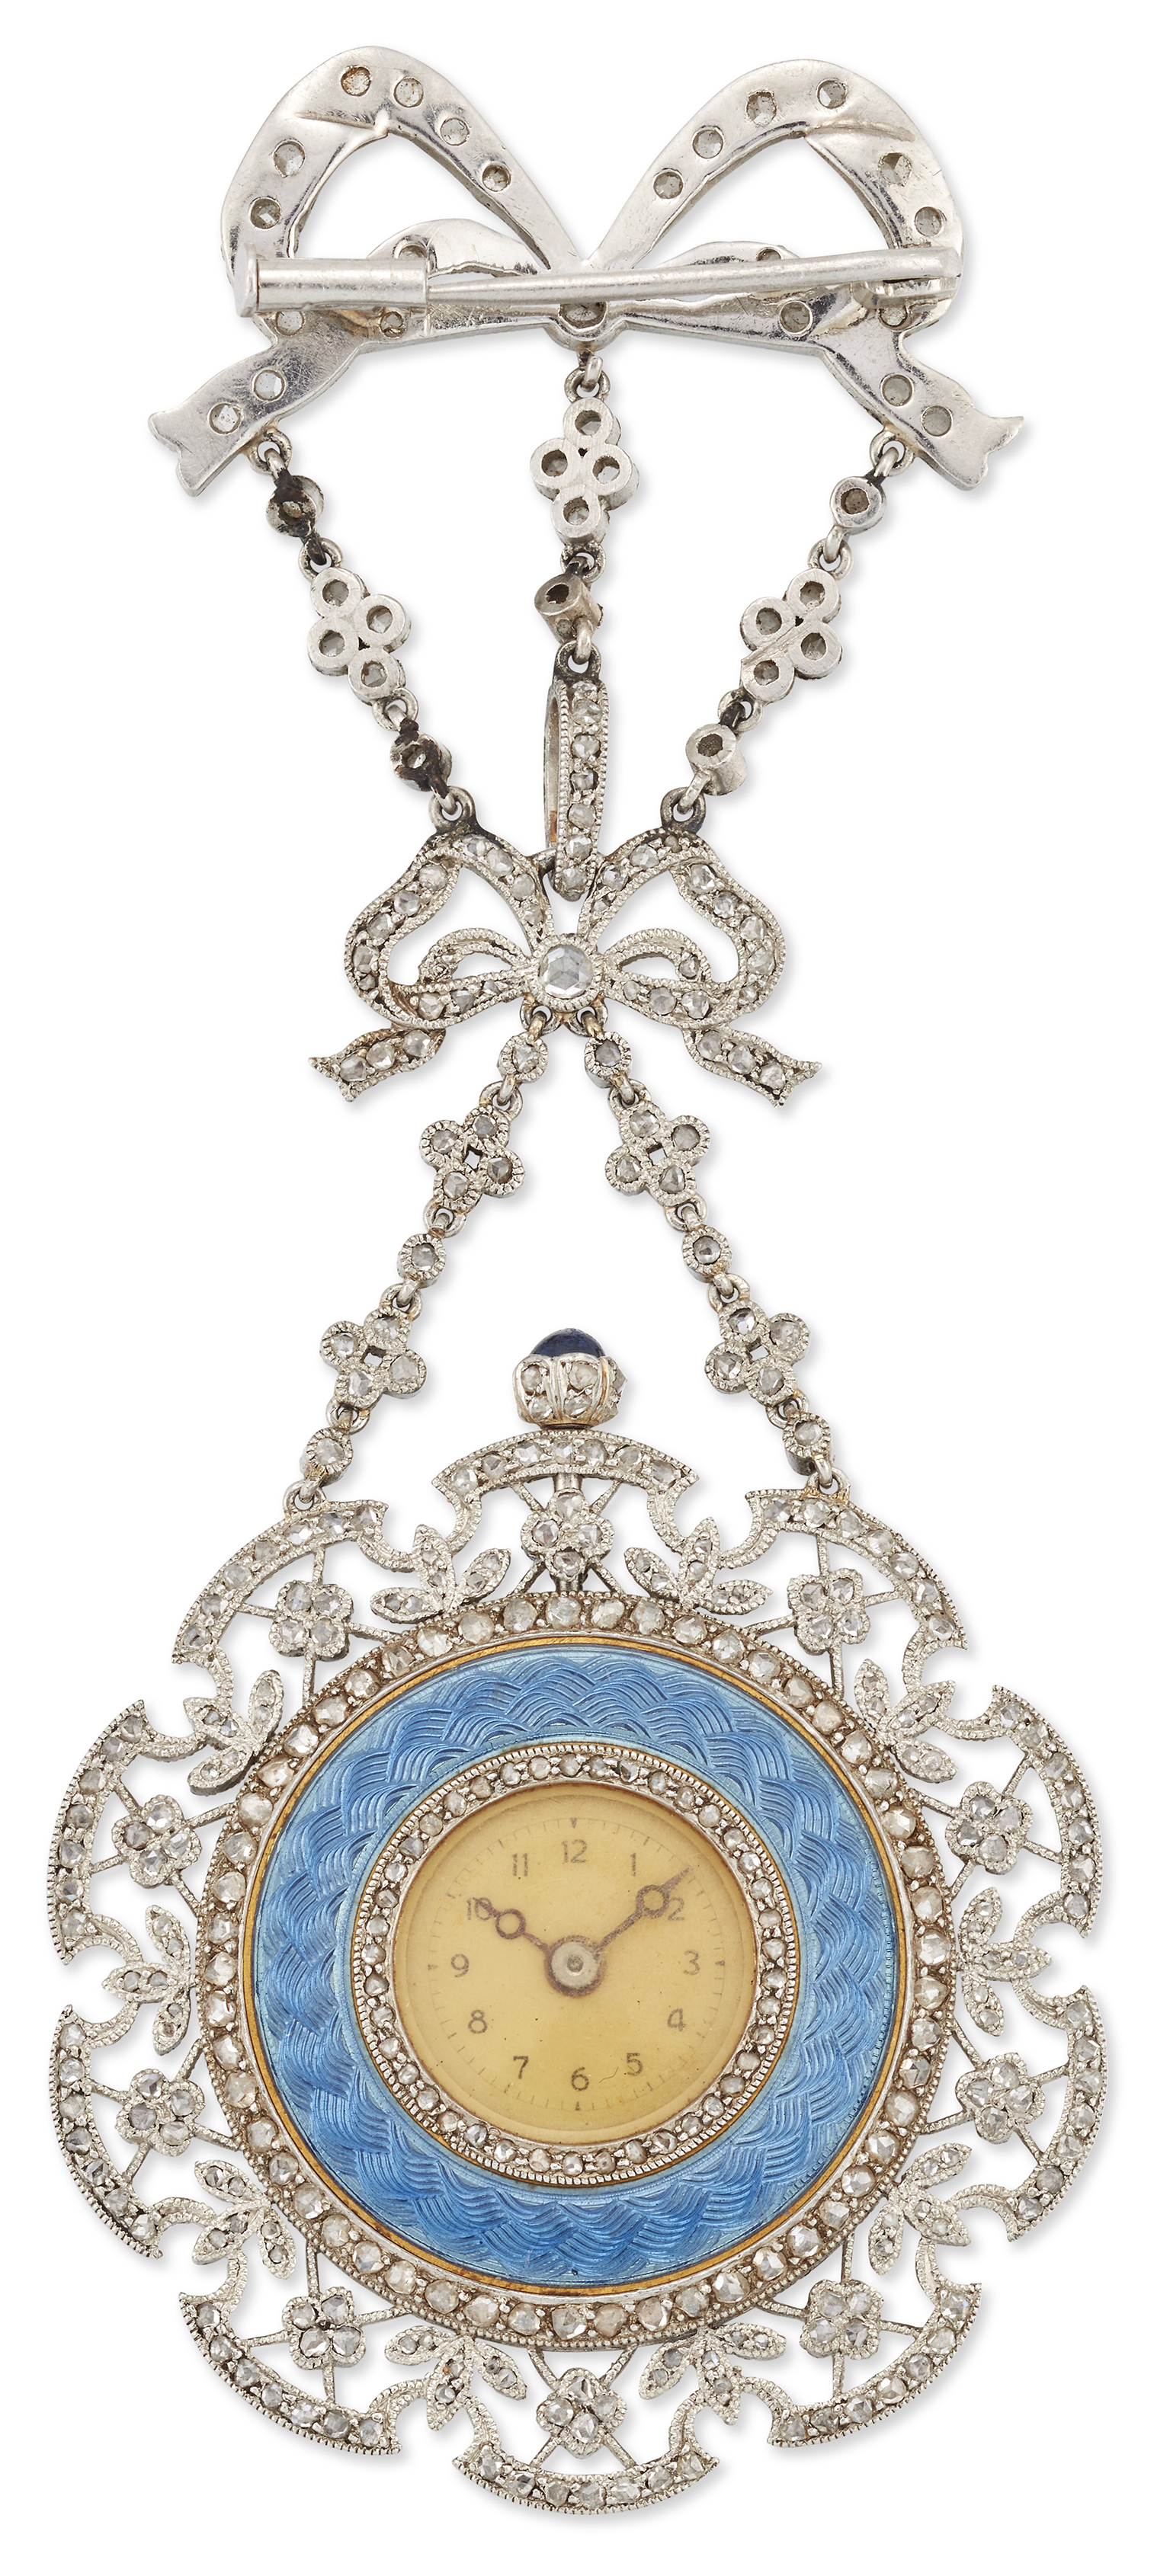 A French Belle Époque gold, platinum, diamond and enamel pendant watch, Circa 1910 Jewelled Swiss... - Image 2 of 2